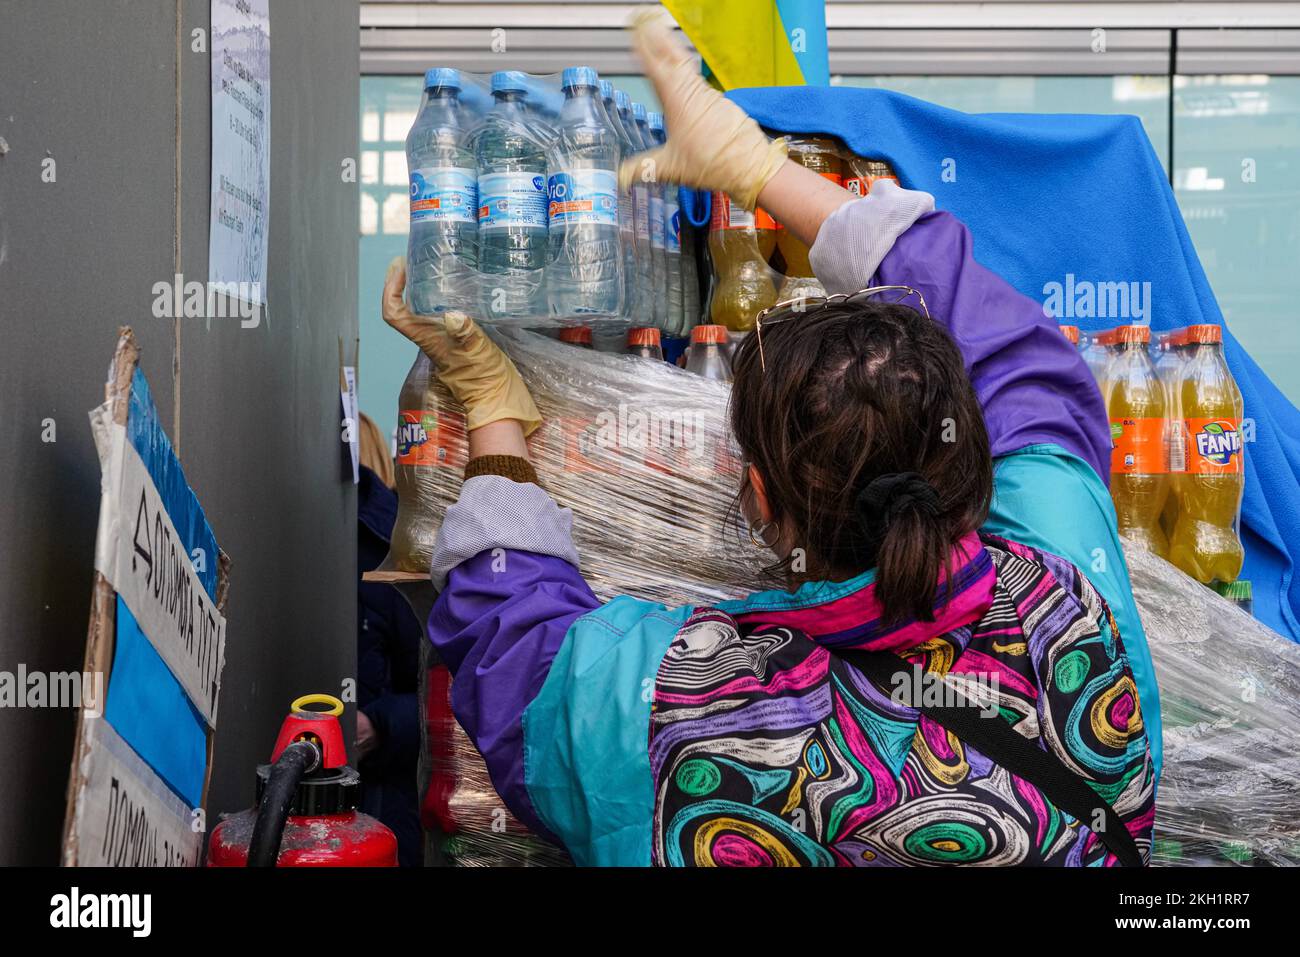 A helper fetches beverage supplies from the europallet for the beverage counter at Munich central station. Stock Photo